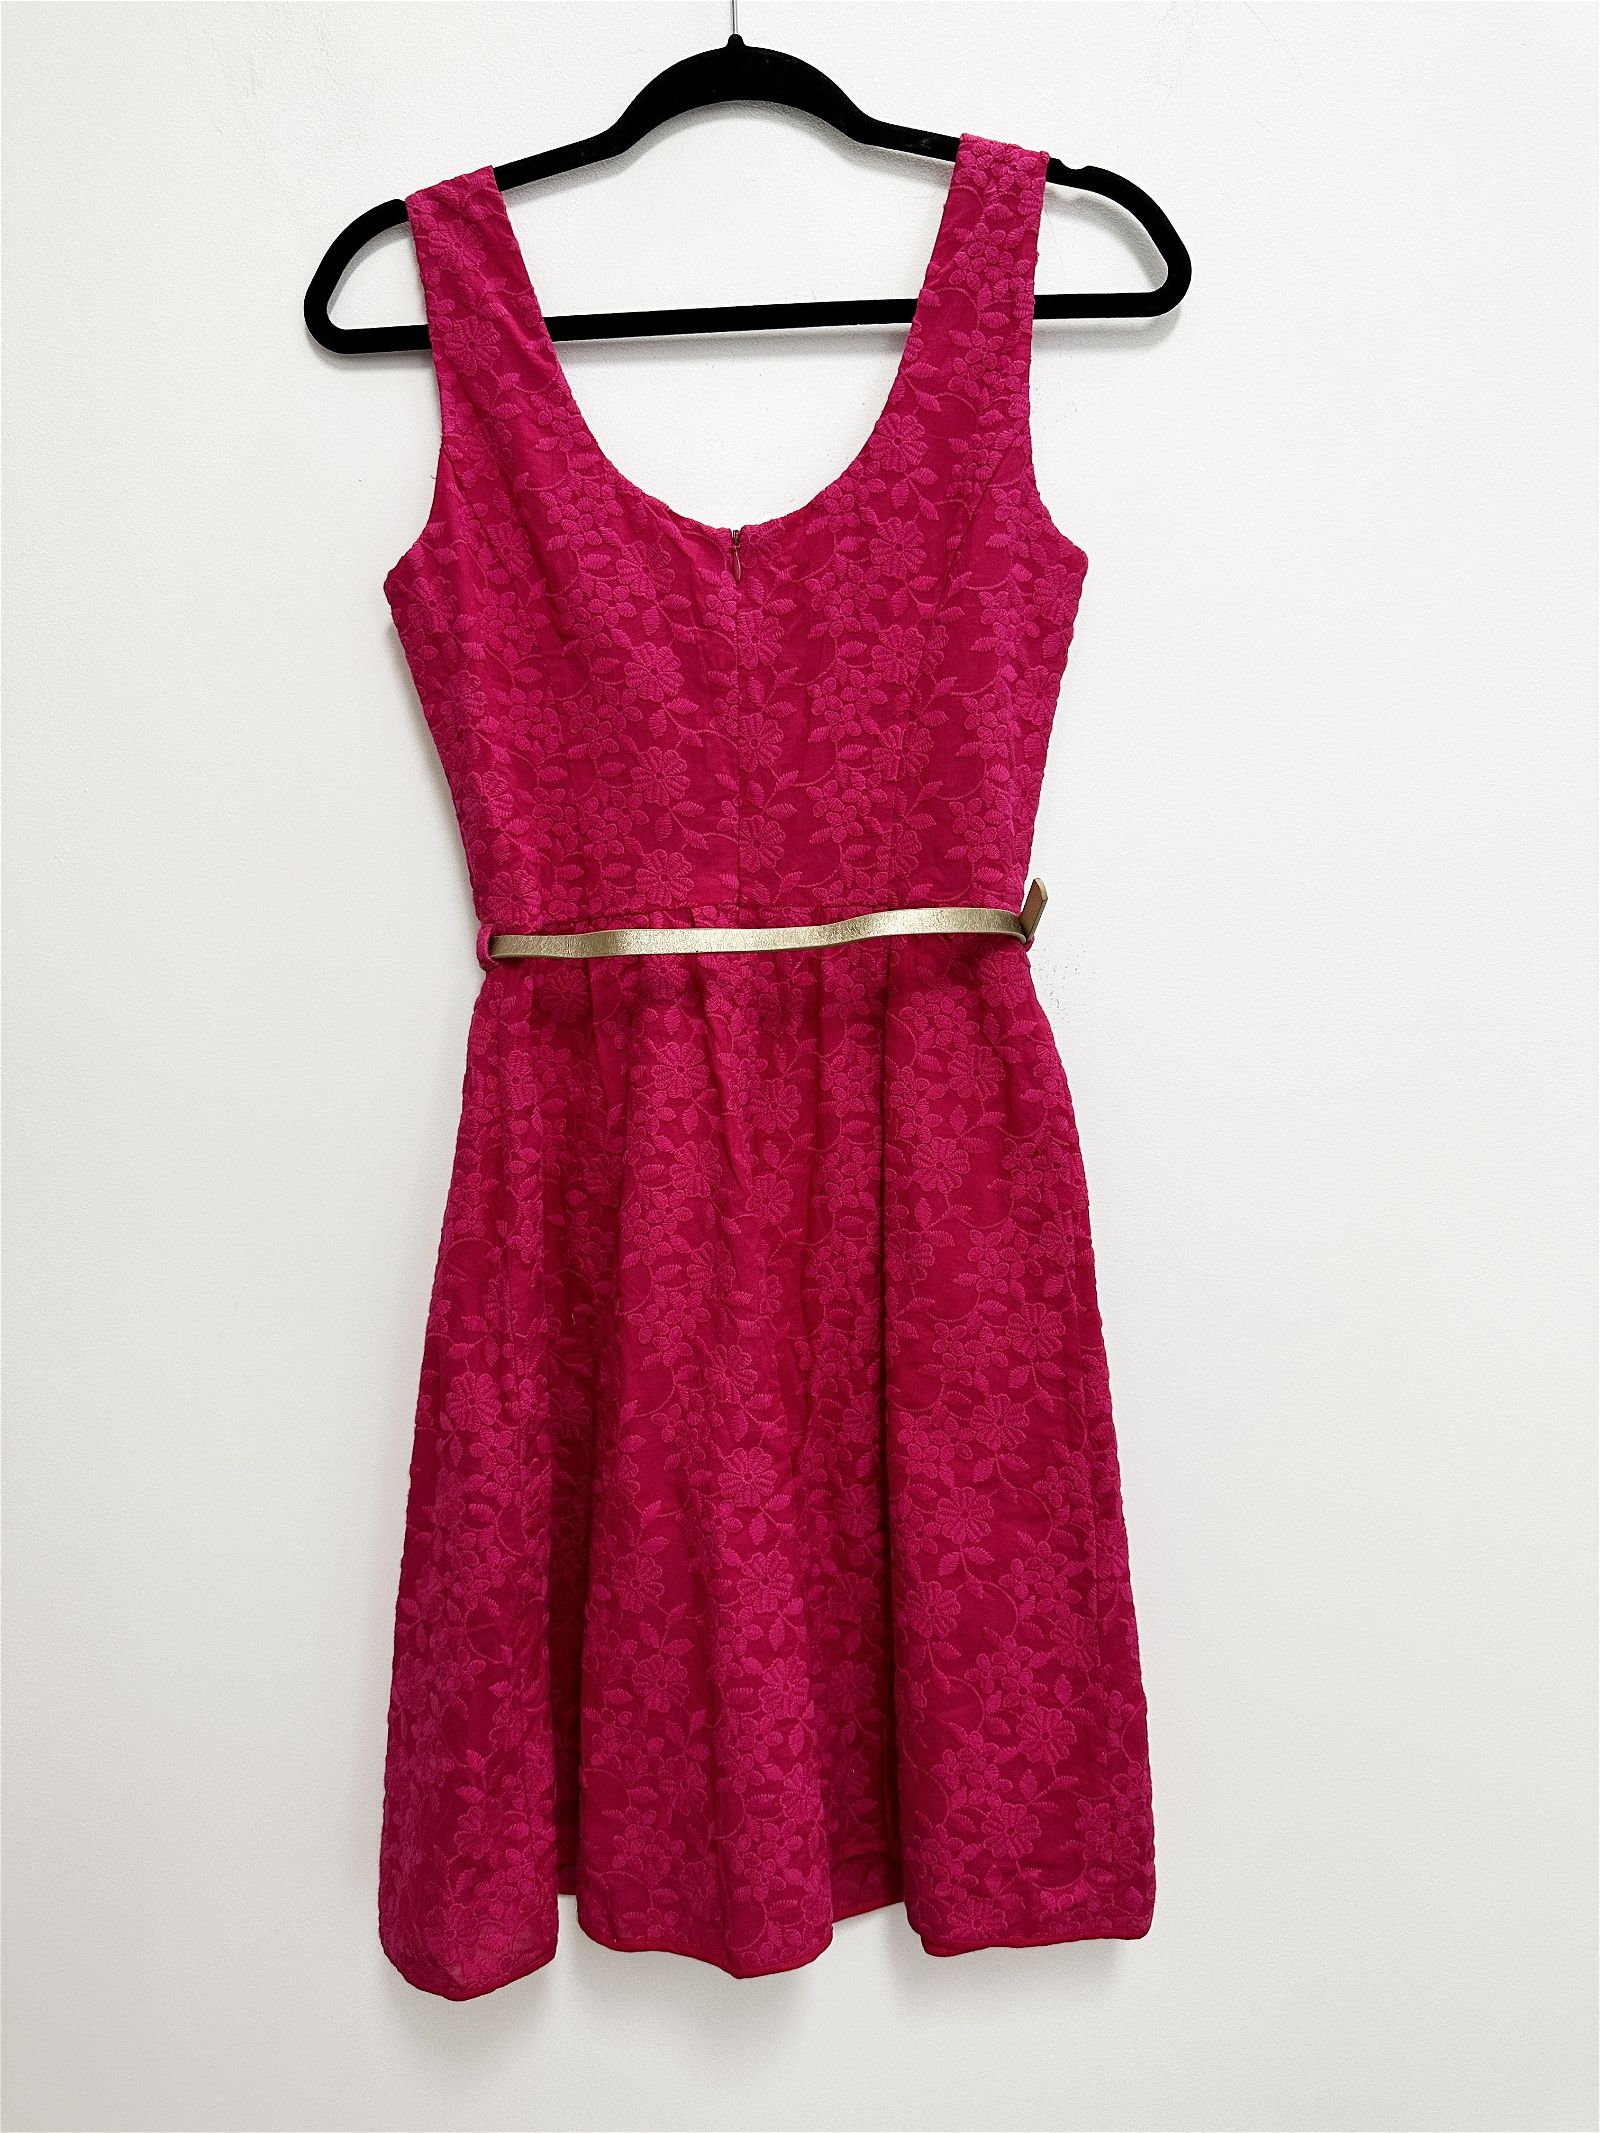 Review Barbie Fuchsia Dress With Gold Belt